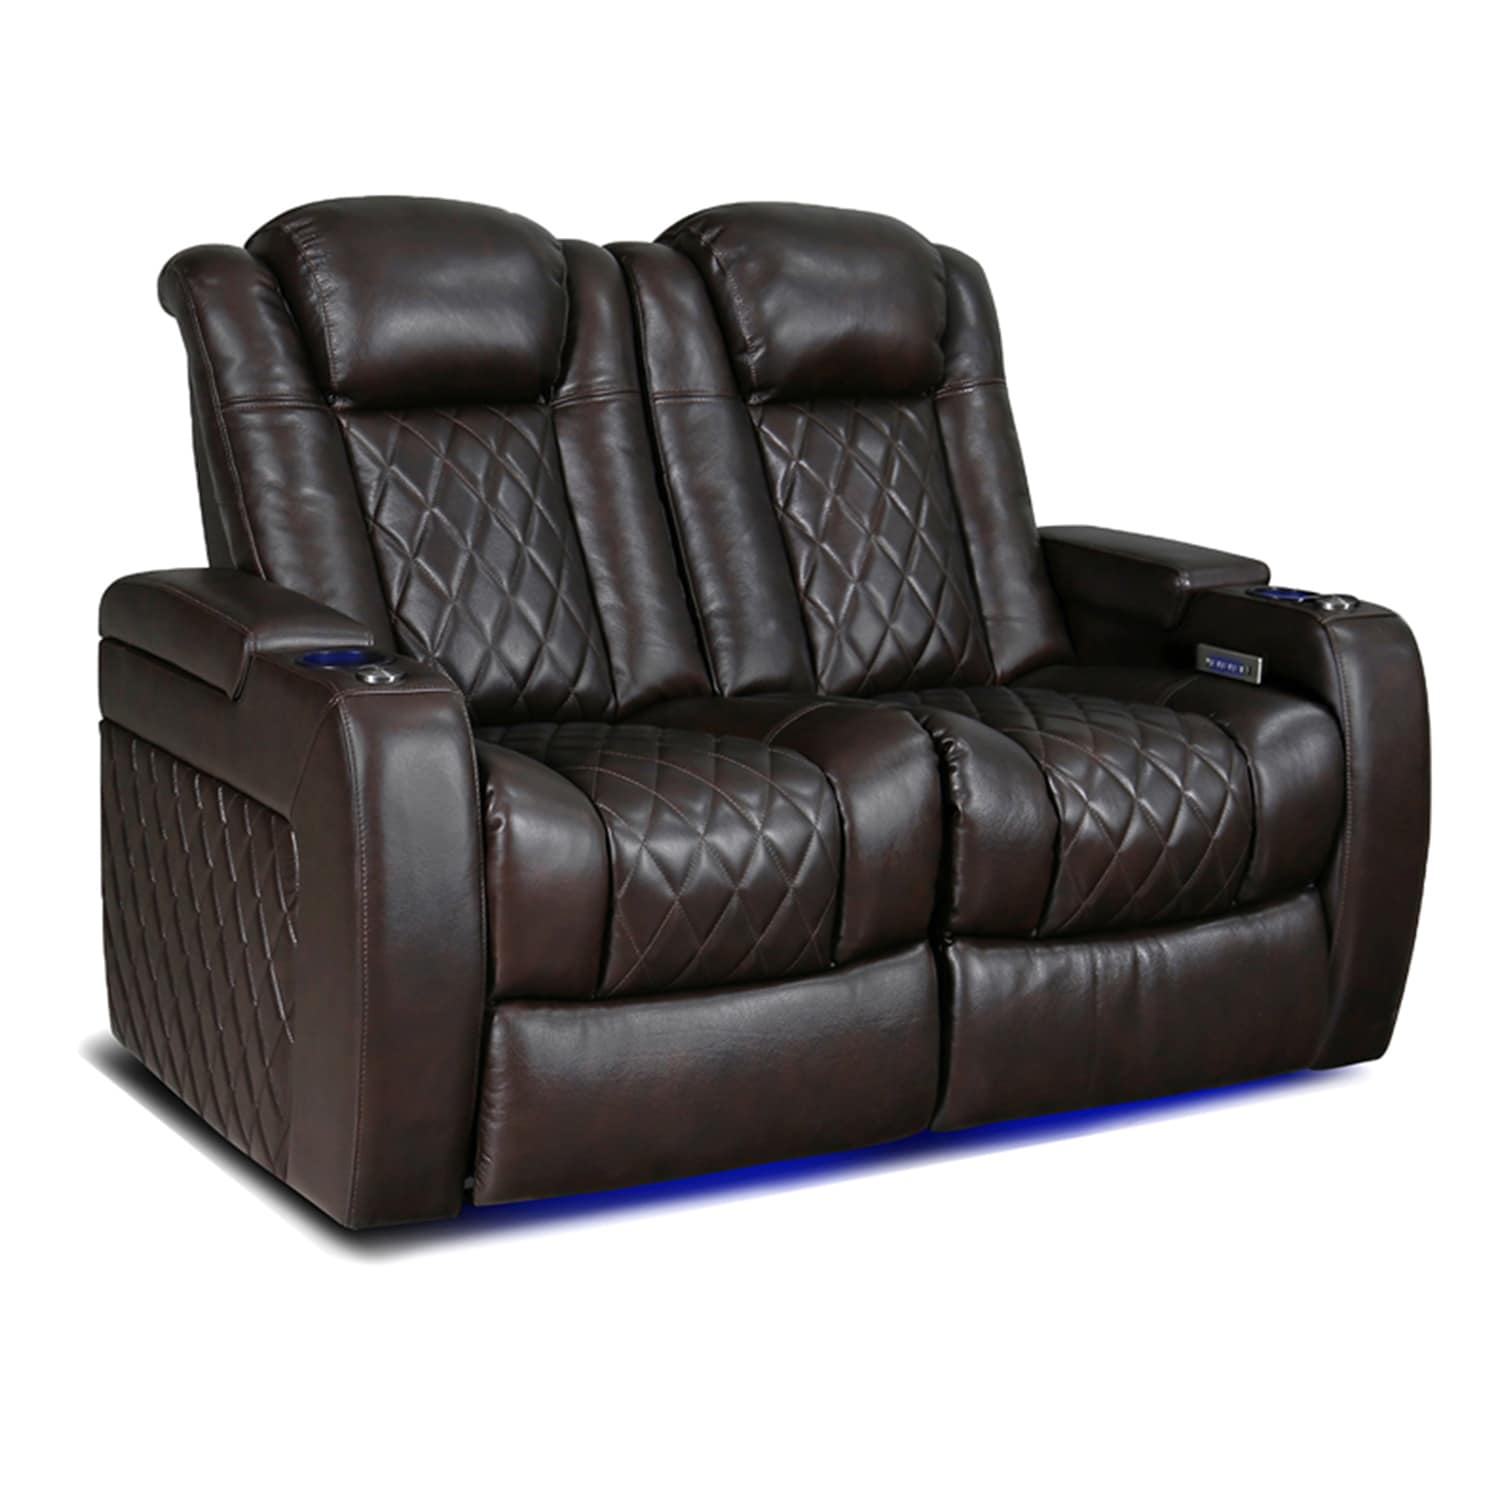 Valencia Tuscany Top Grain Nappa 11000 Leather Home Theater Seating Power Recliner Row Of 2 Loveseat Dark Chocolate